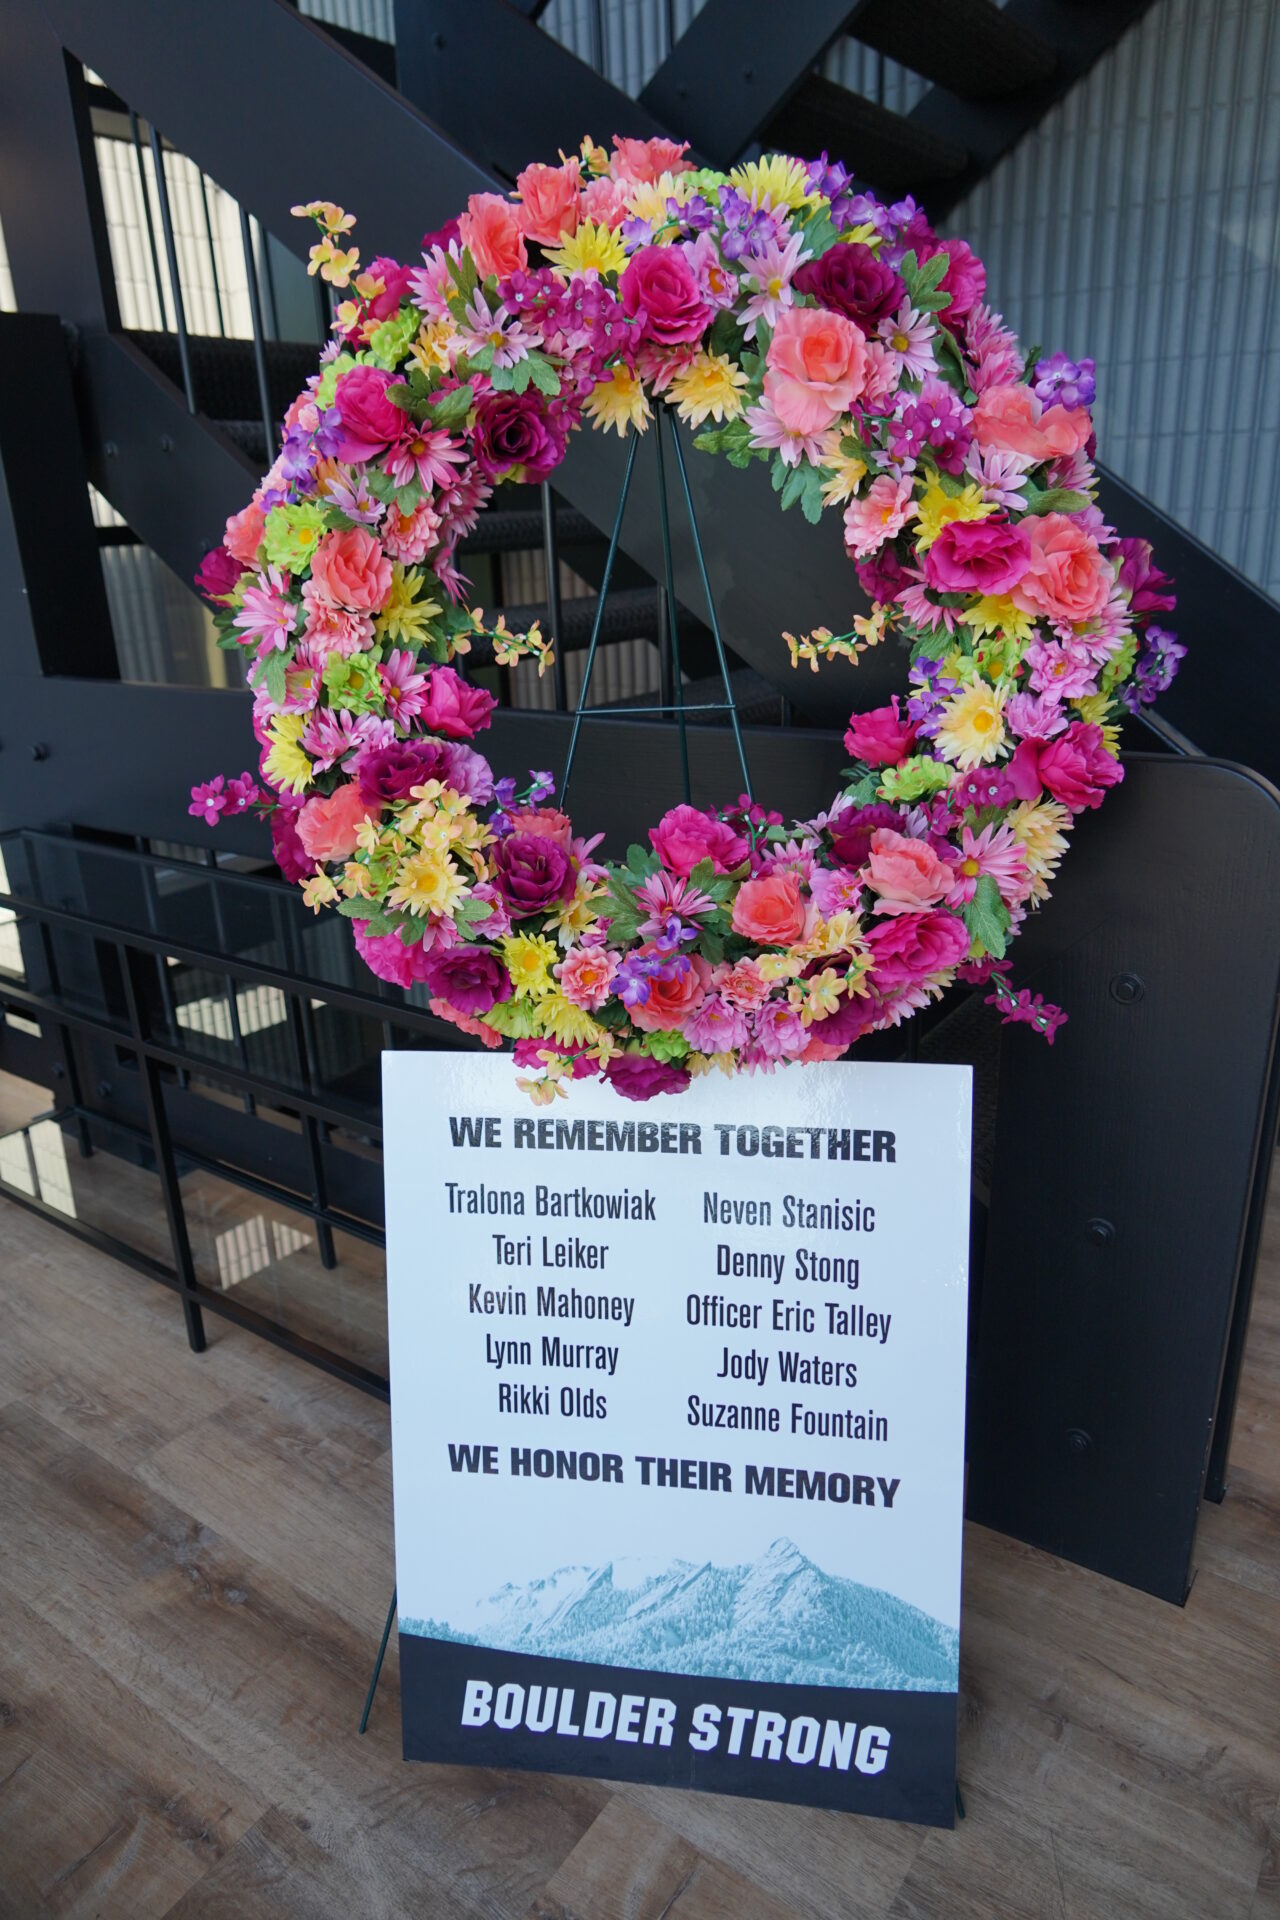 Remembering the victims of the March 22nd shooting